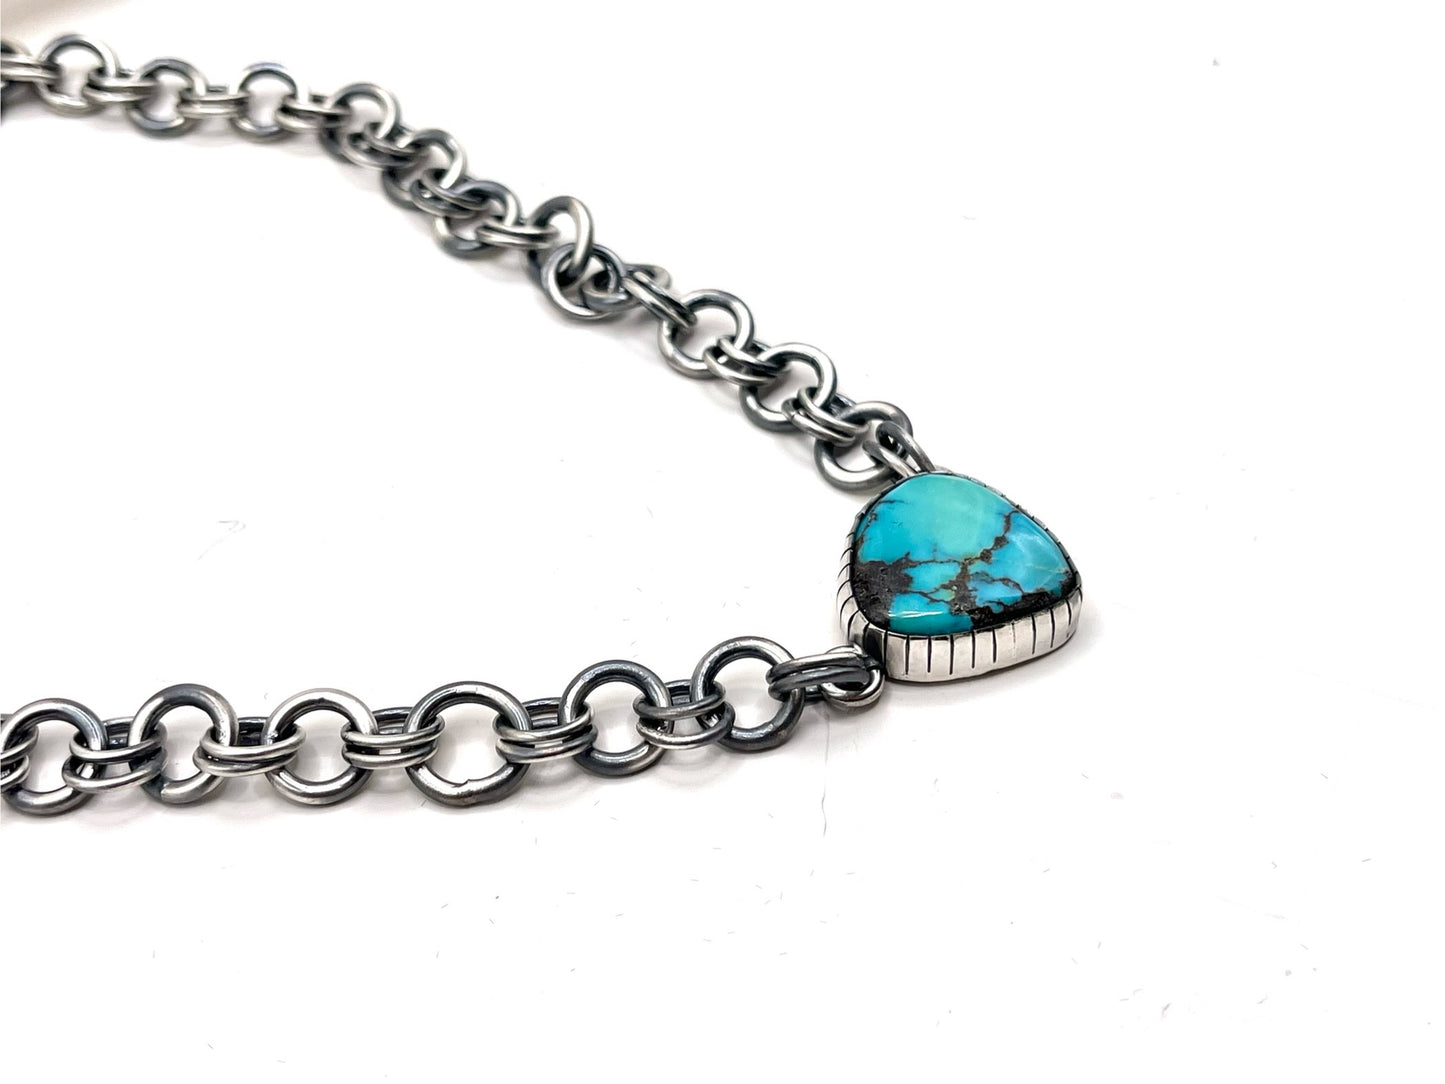 Cloud mountain Turquoise Necklace